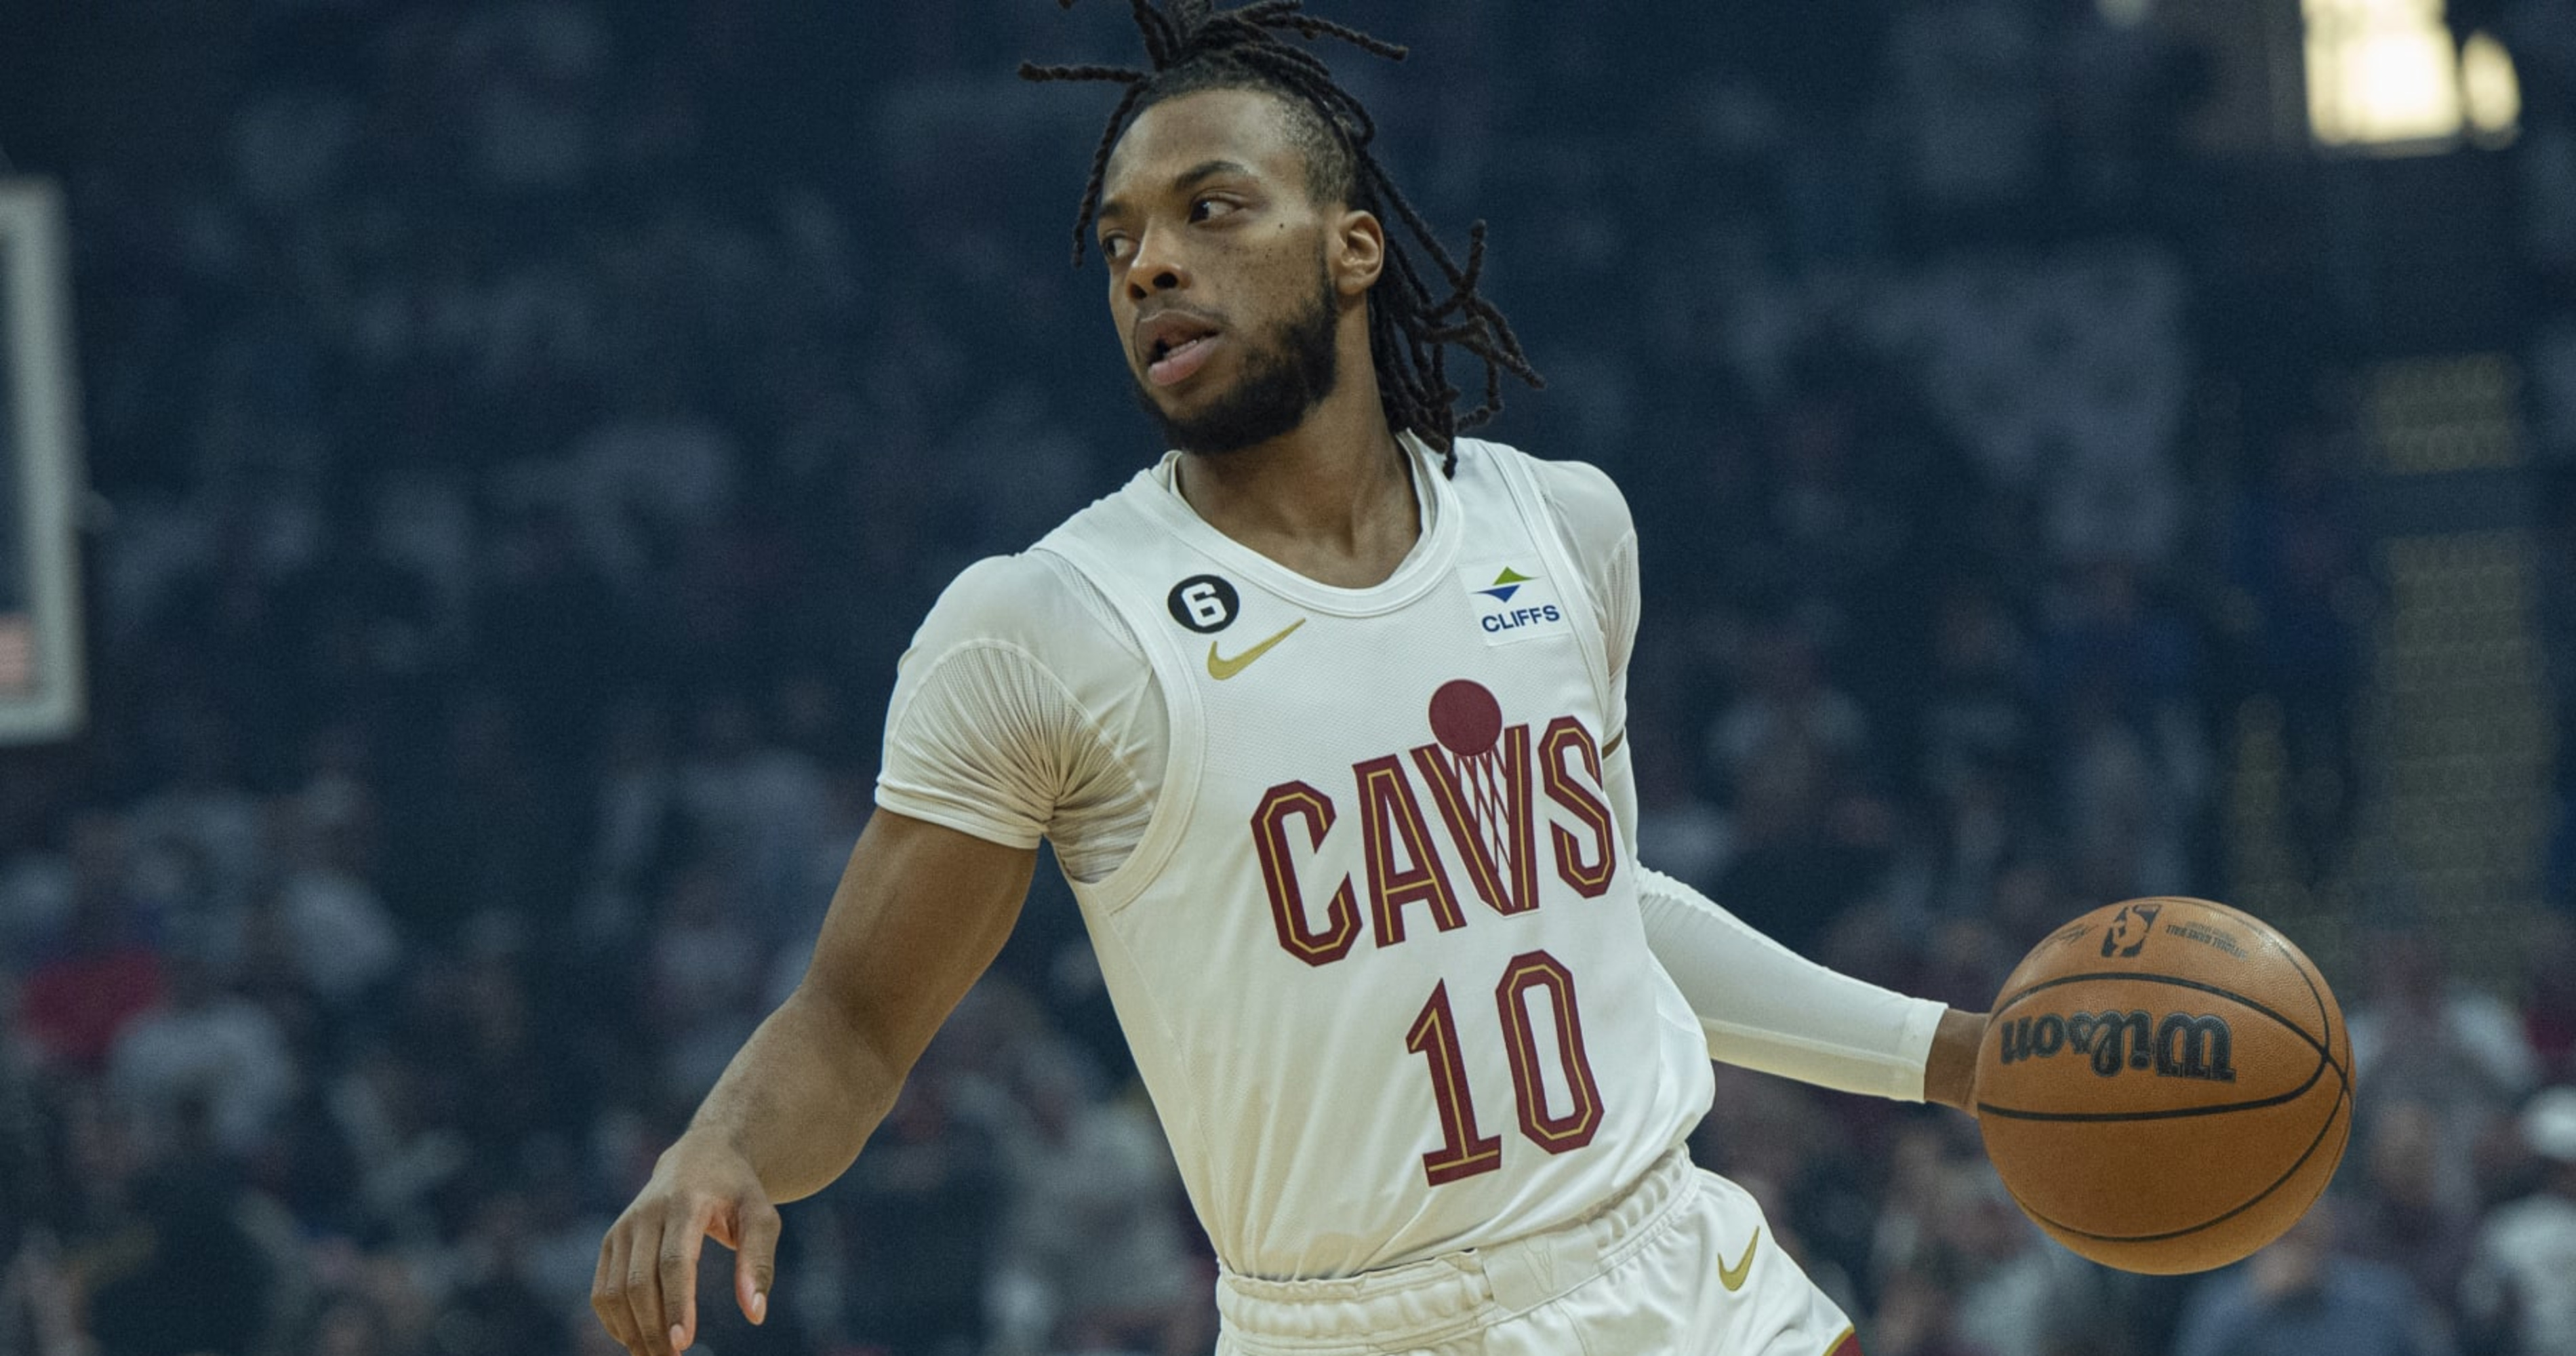 Darius Garland Trade Rumors Cavs Have Not Held 'Any Discussions' About